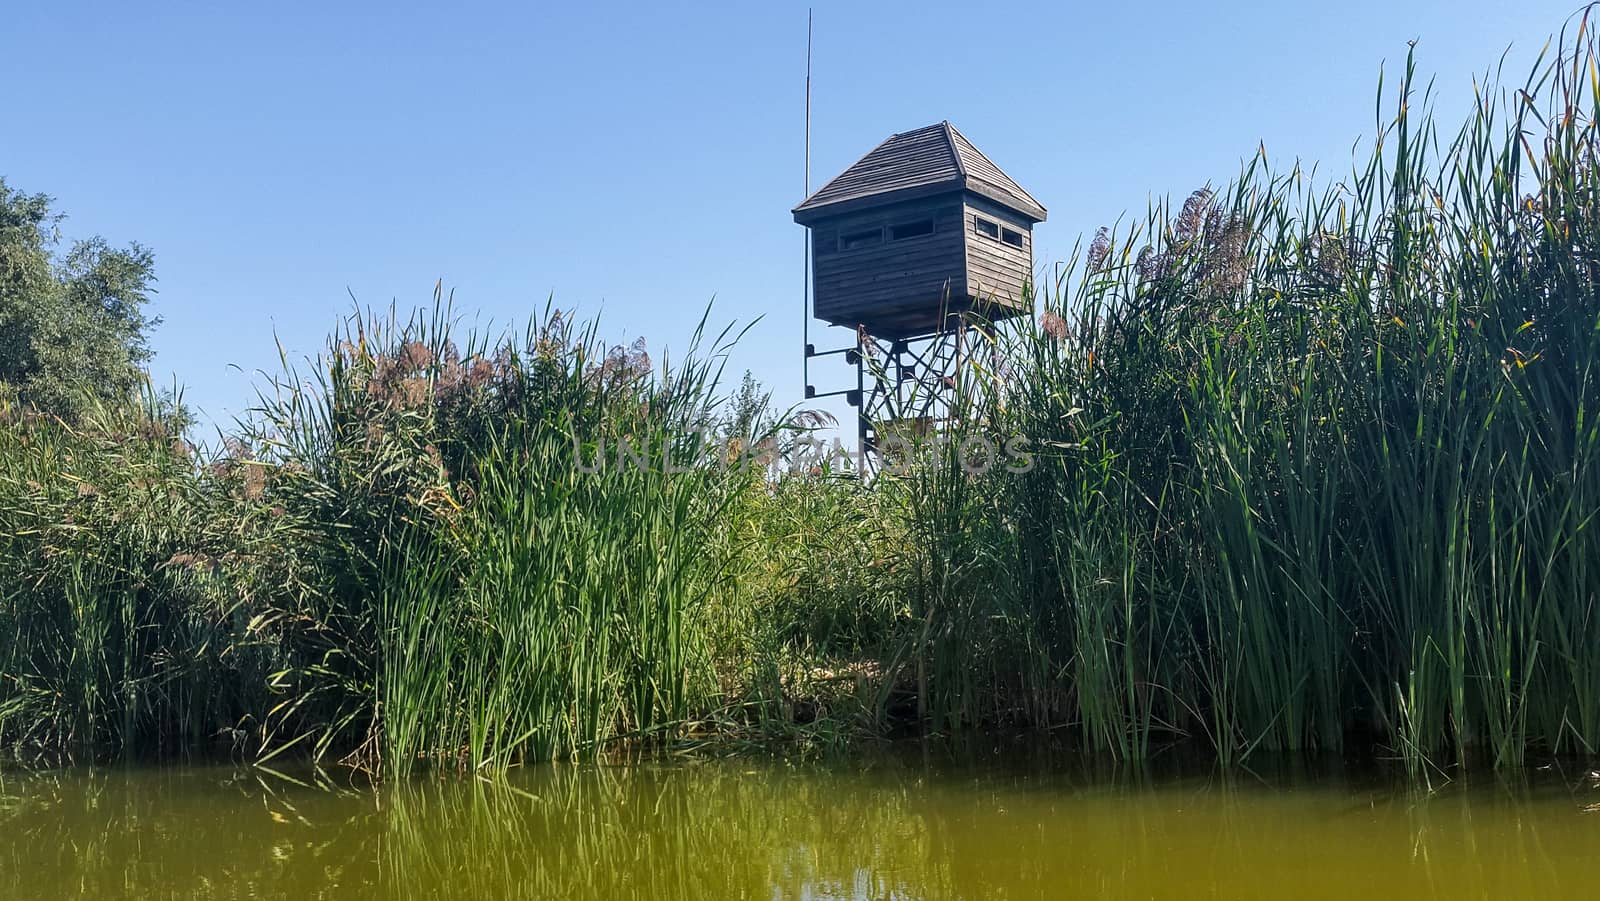 Wildlife observation tower point in the Delta, next to a small water channel, outdoor in daylight. Wooden structure on a metallic frame.